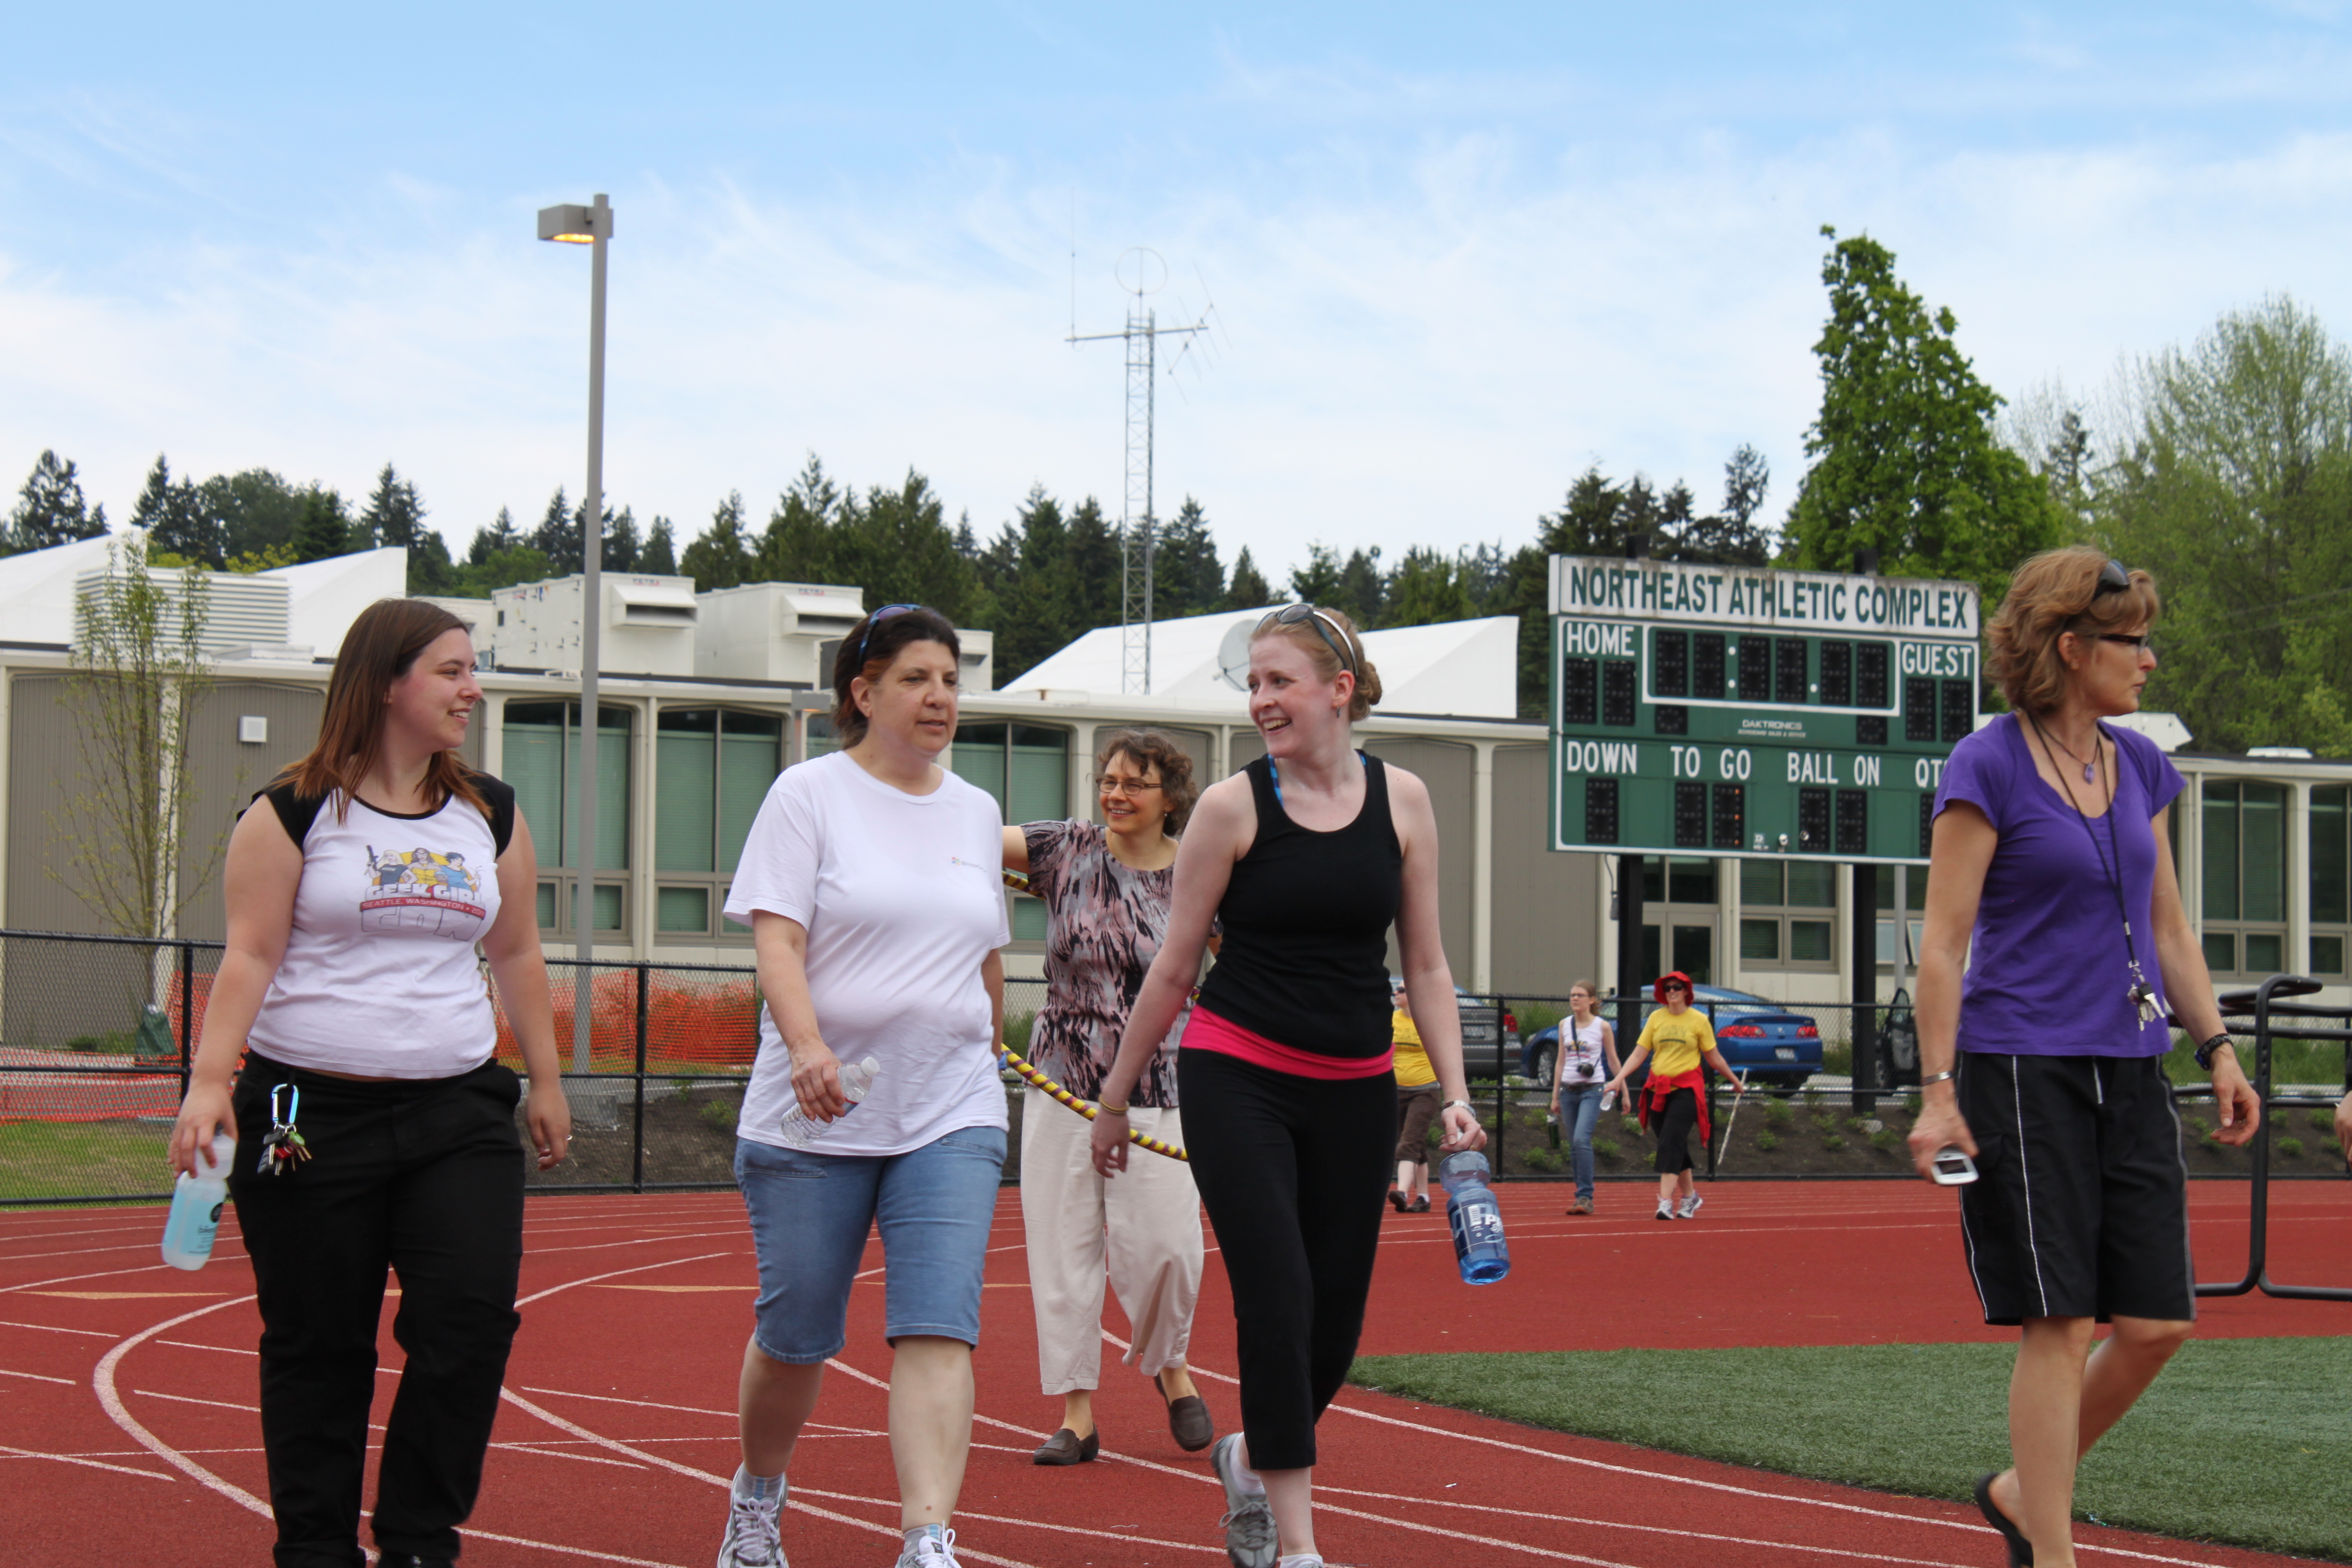 Women walk around the track in support of an IGNITE fundraiser event, Cheryl is pictured third from the left in a black tank top and running pants.